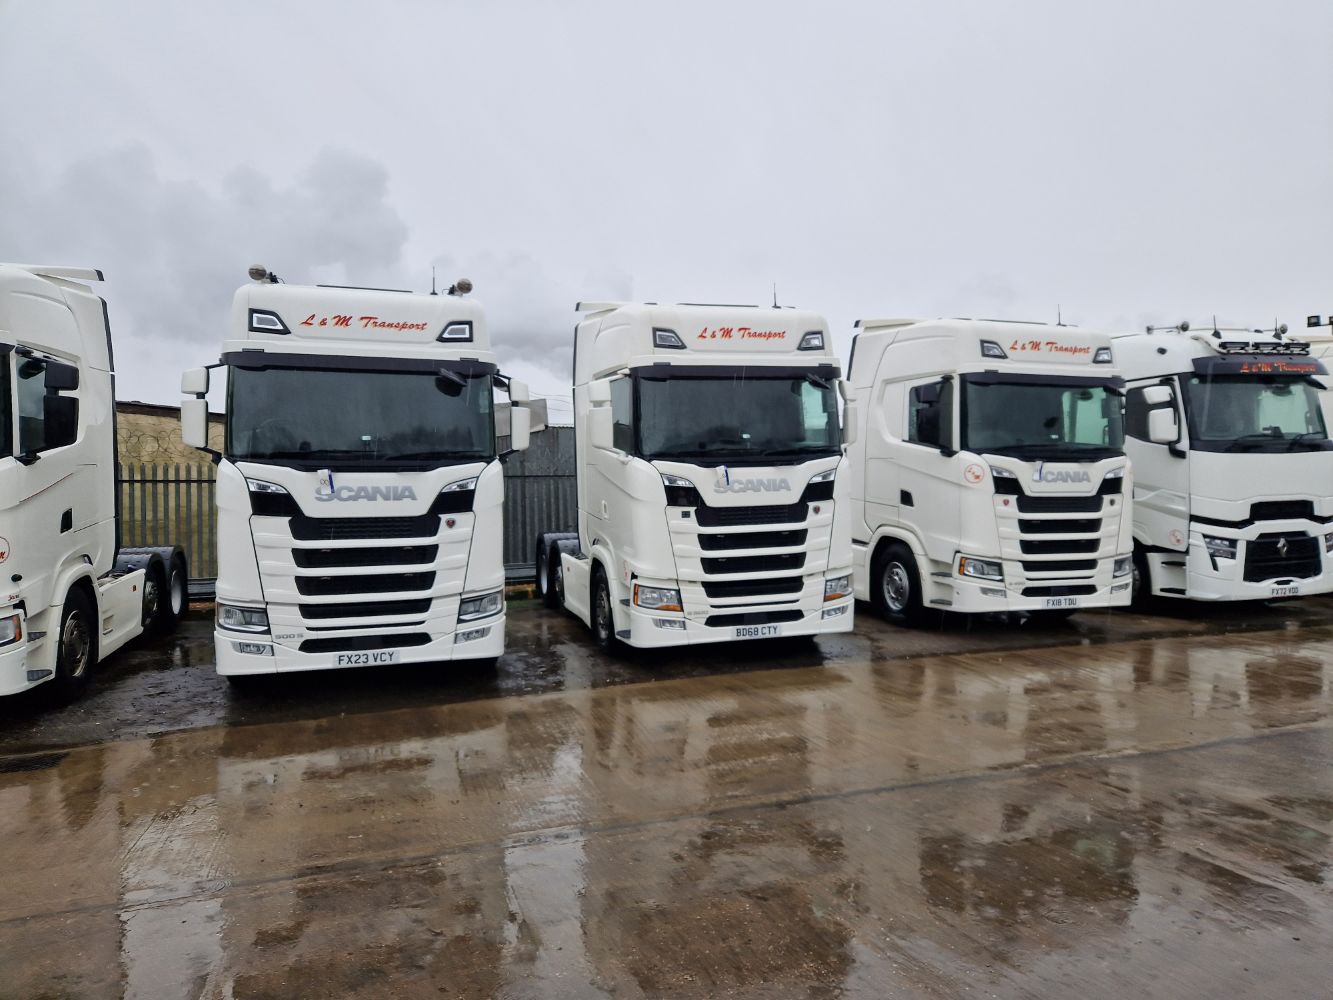 Late Model High Spec Scania & Volvo Tractor Units, Two Ford Transit Crew Cabs, Linde Fork Lift Truck & Bunded Fuel Tank